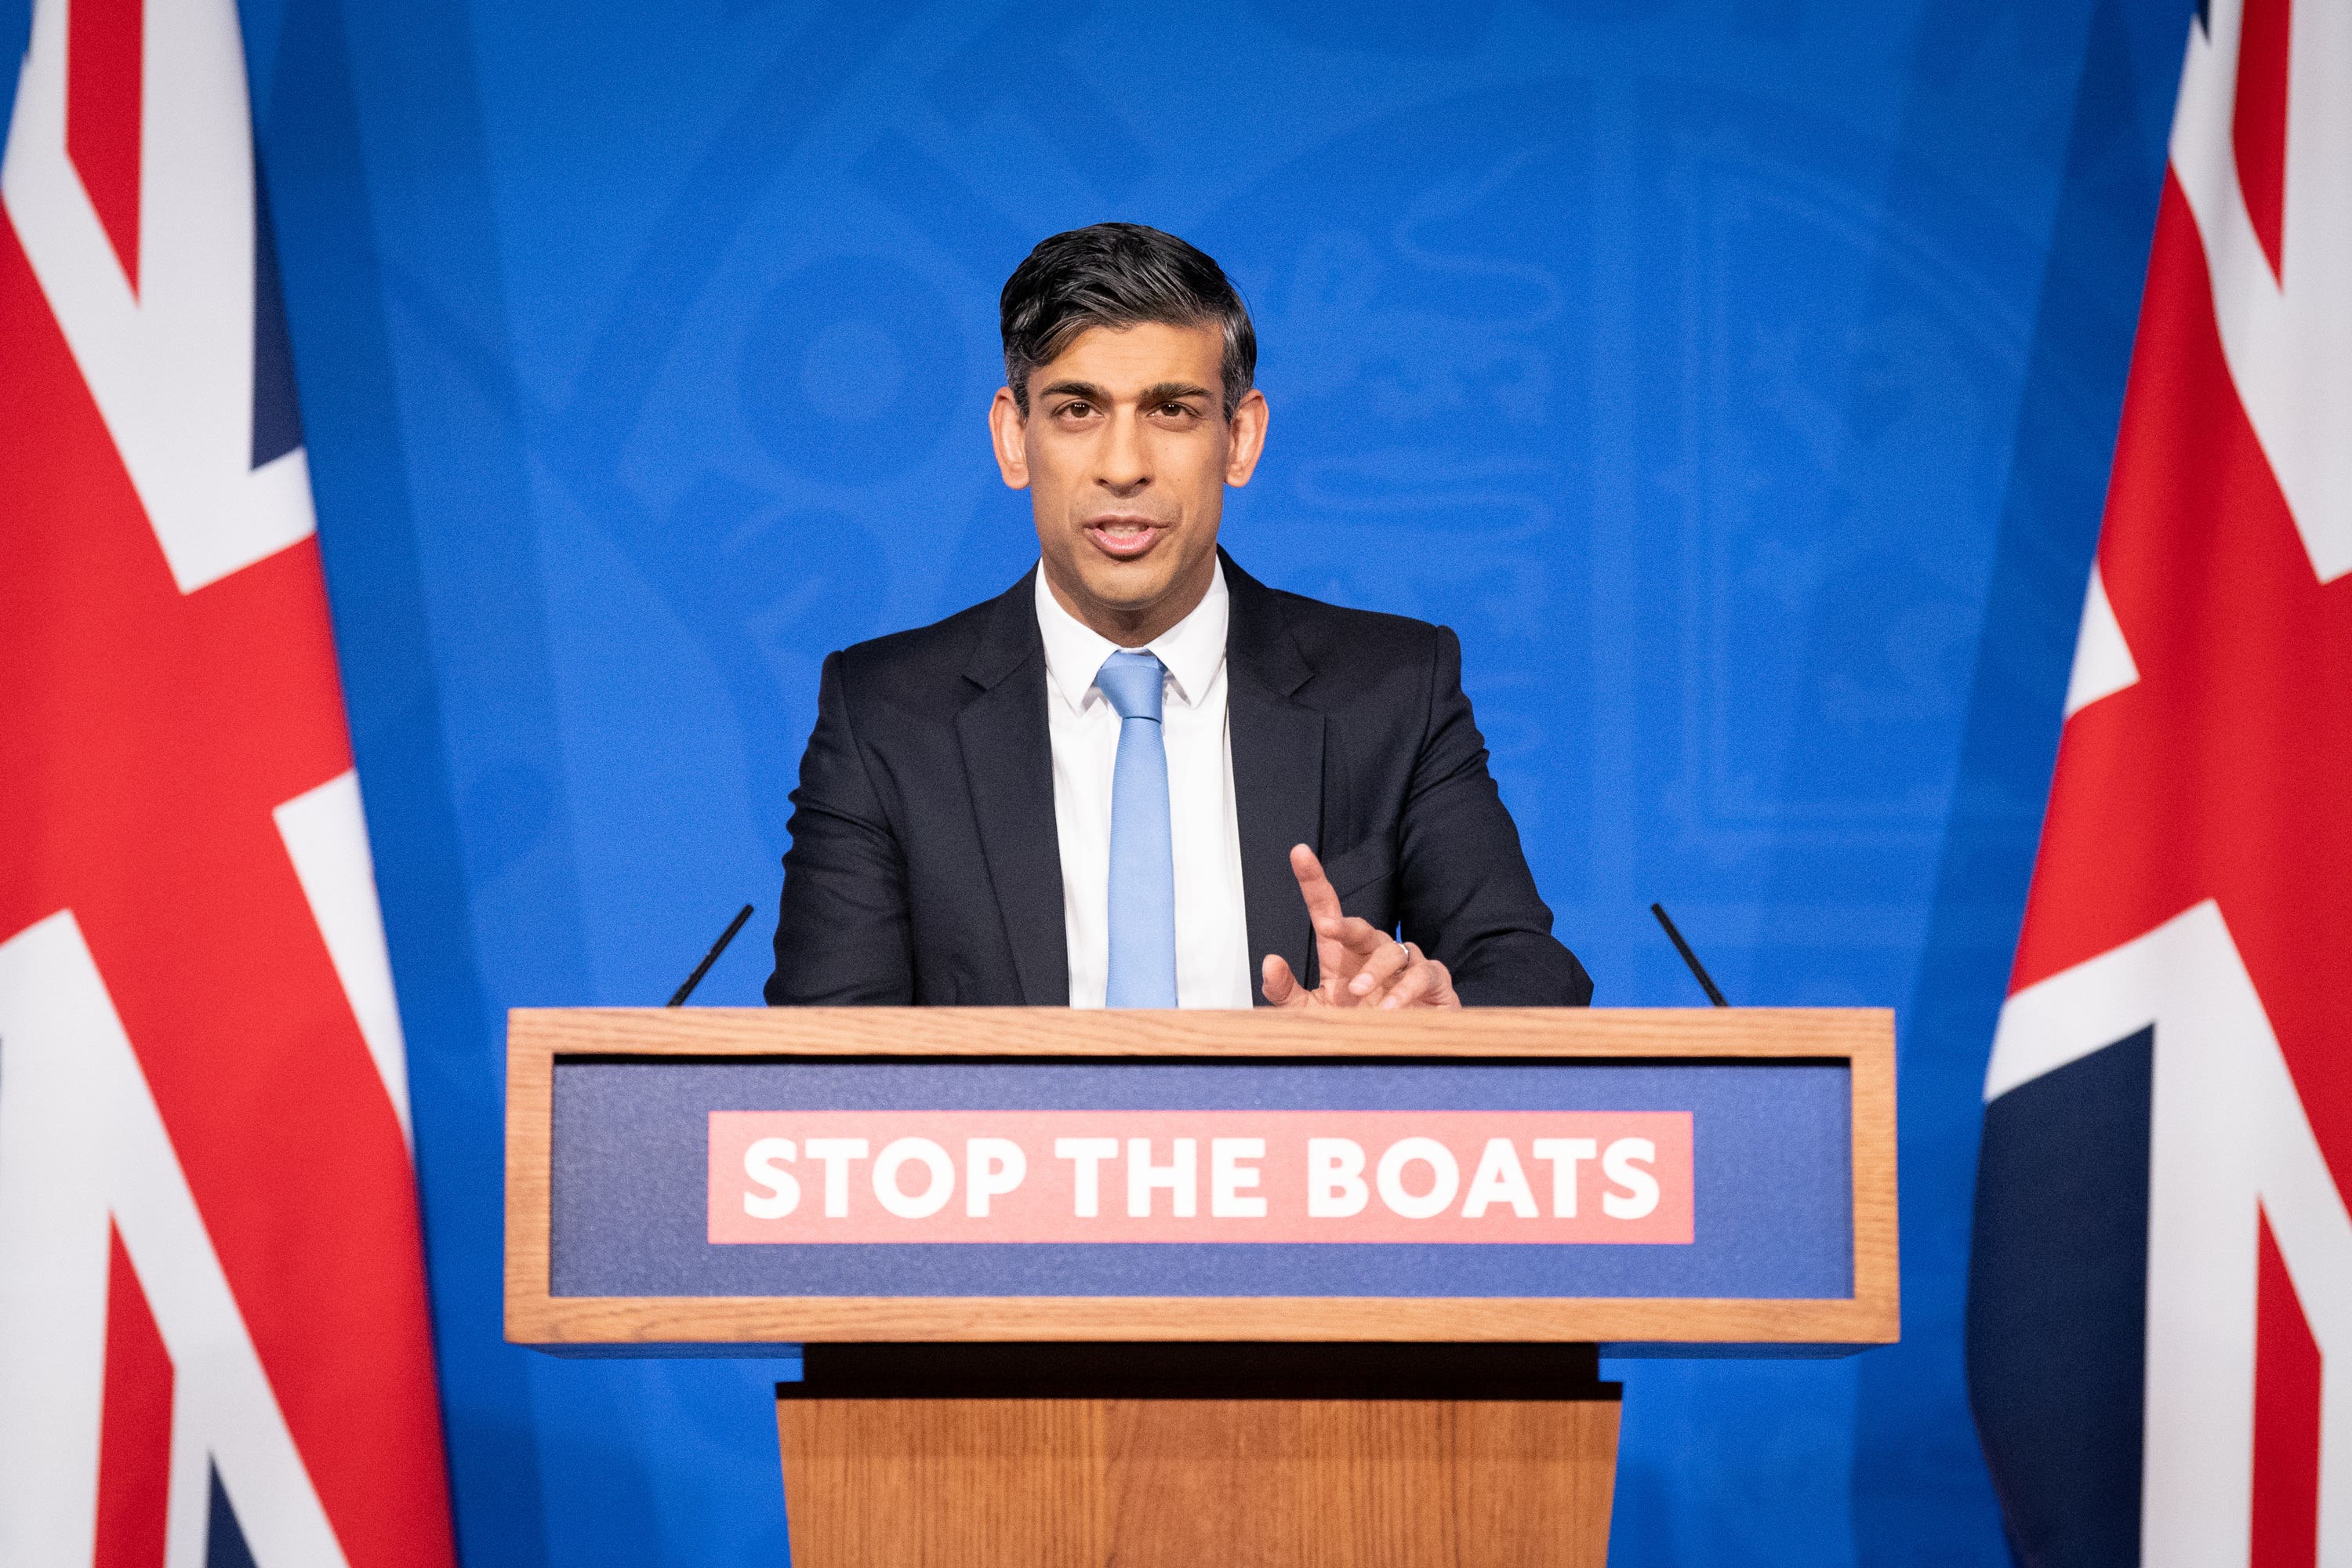 Prime Minister Rishi Sunak has made ‘stopping the boats’ one of the key pledges of his leadership (PA)